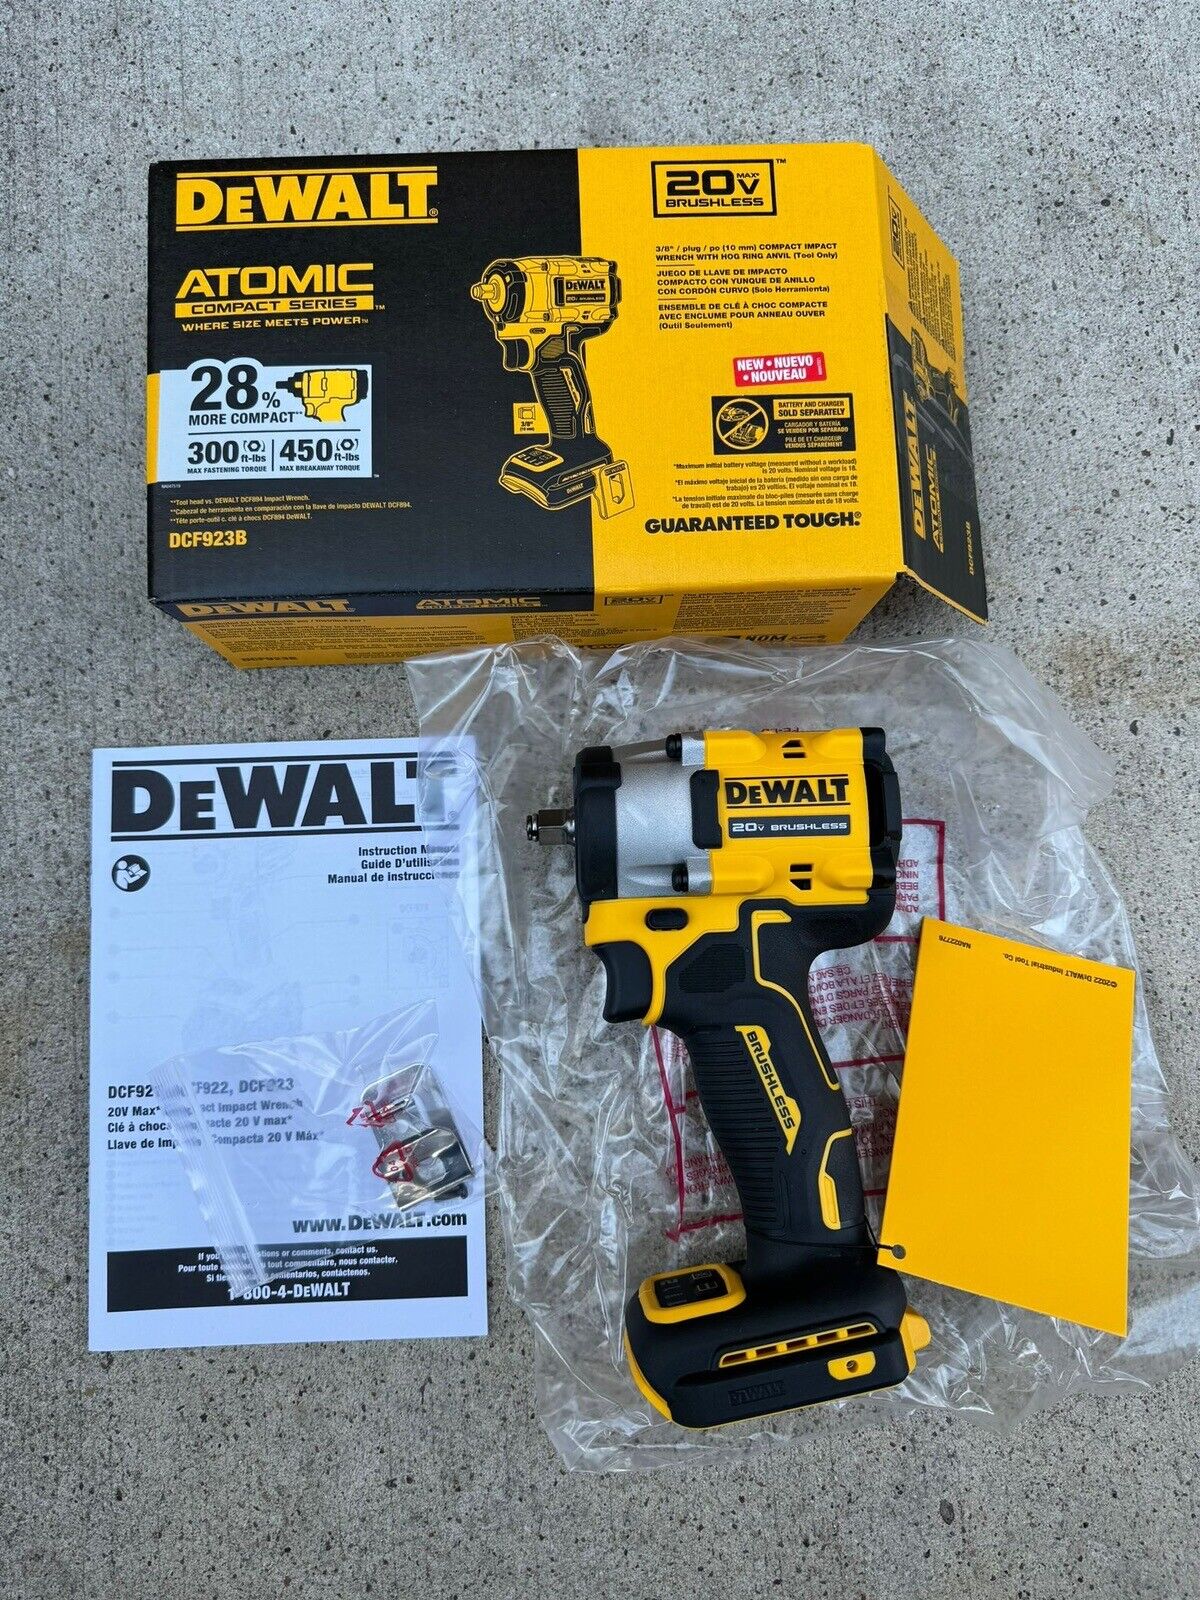 DEWALT DCF923B ATOMIC 20V MAX* 3/8 in. Cordless Impact Wrench (Tool Only)